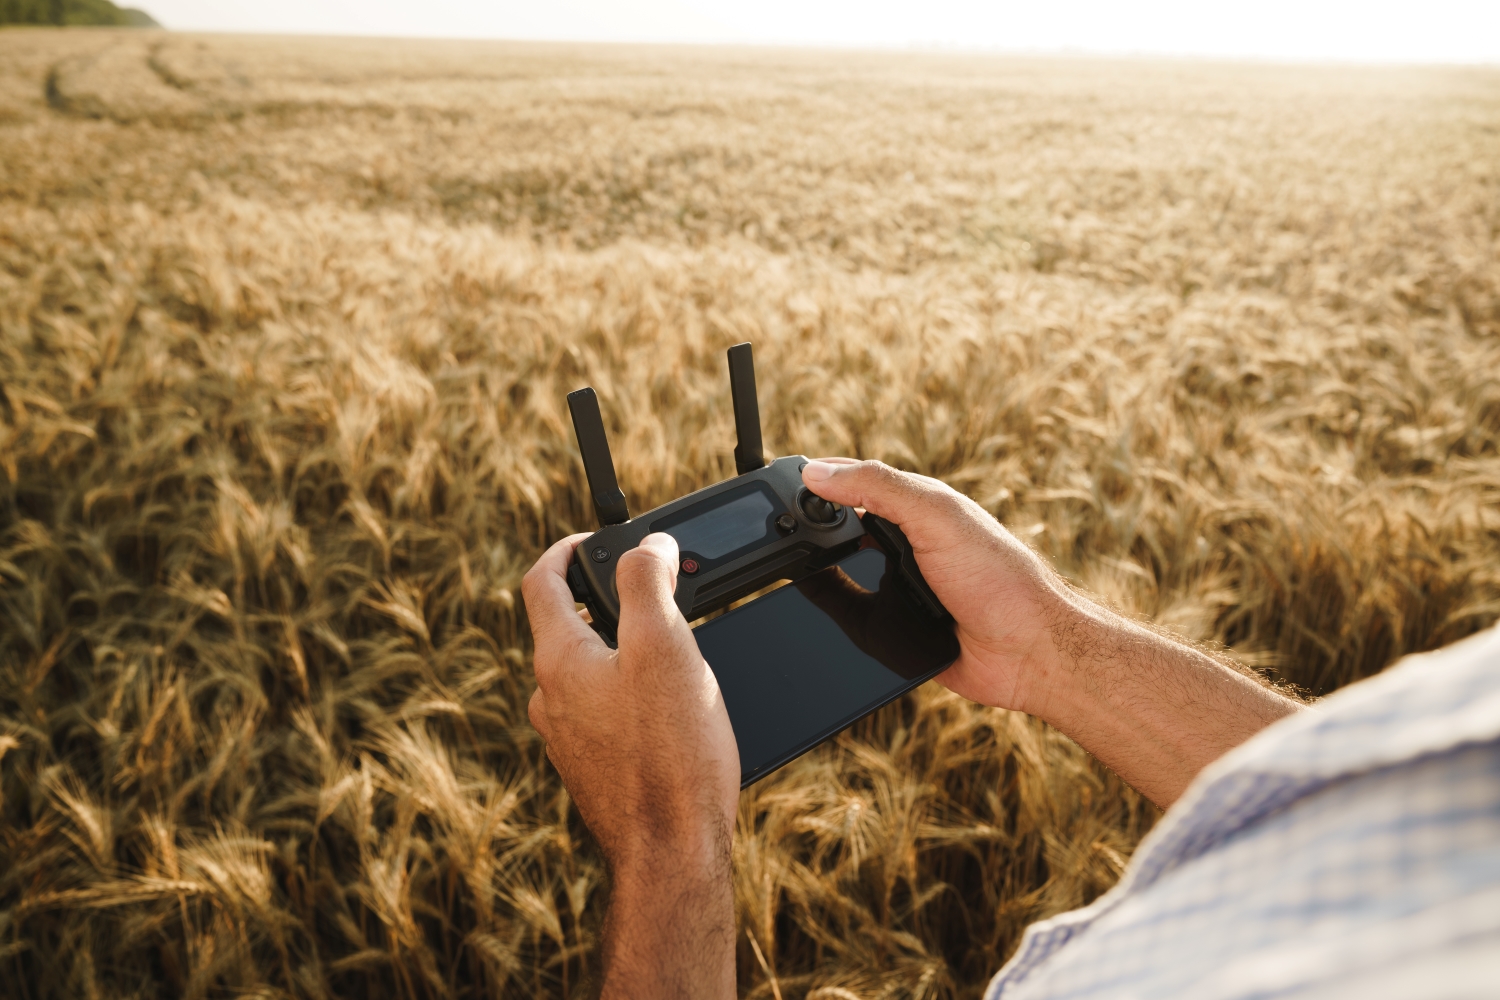 Male hands holding remote controller of quadcopter in wheat field, close up